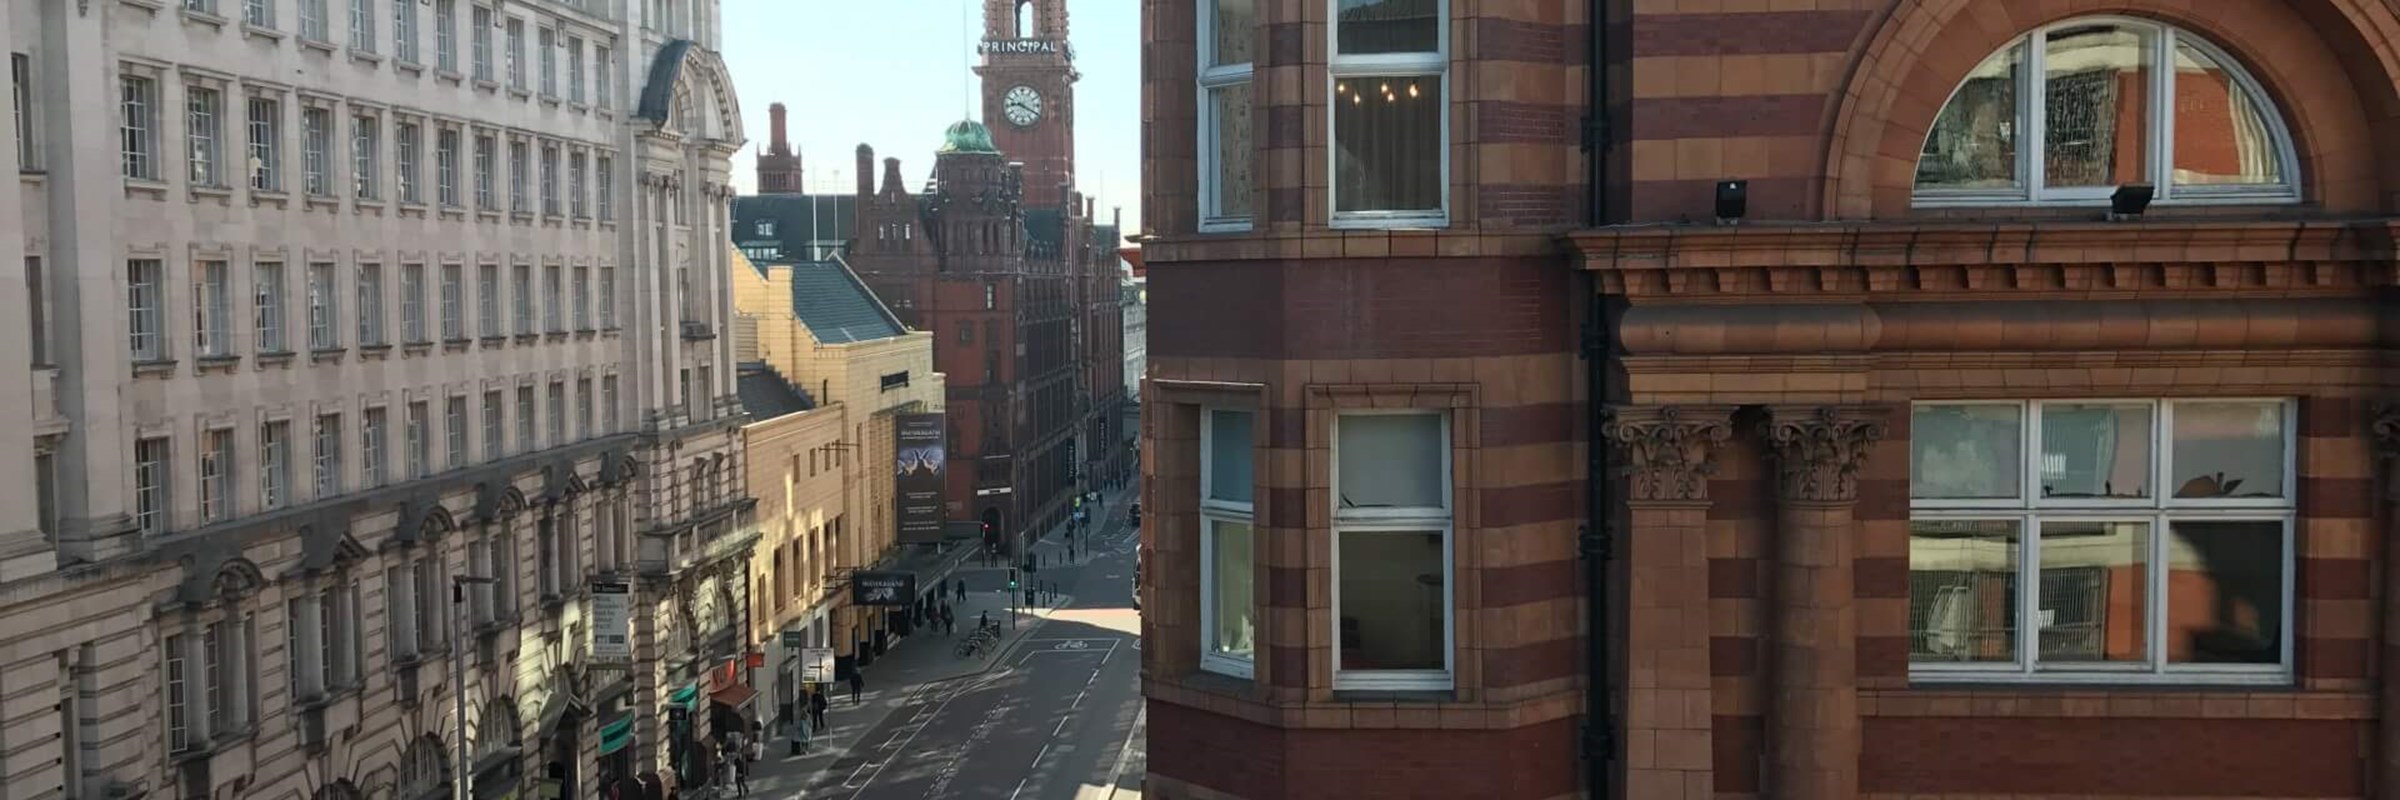 Photo of office buildings on Oxford Road, Manchester